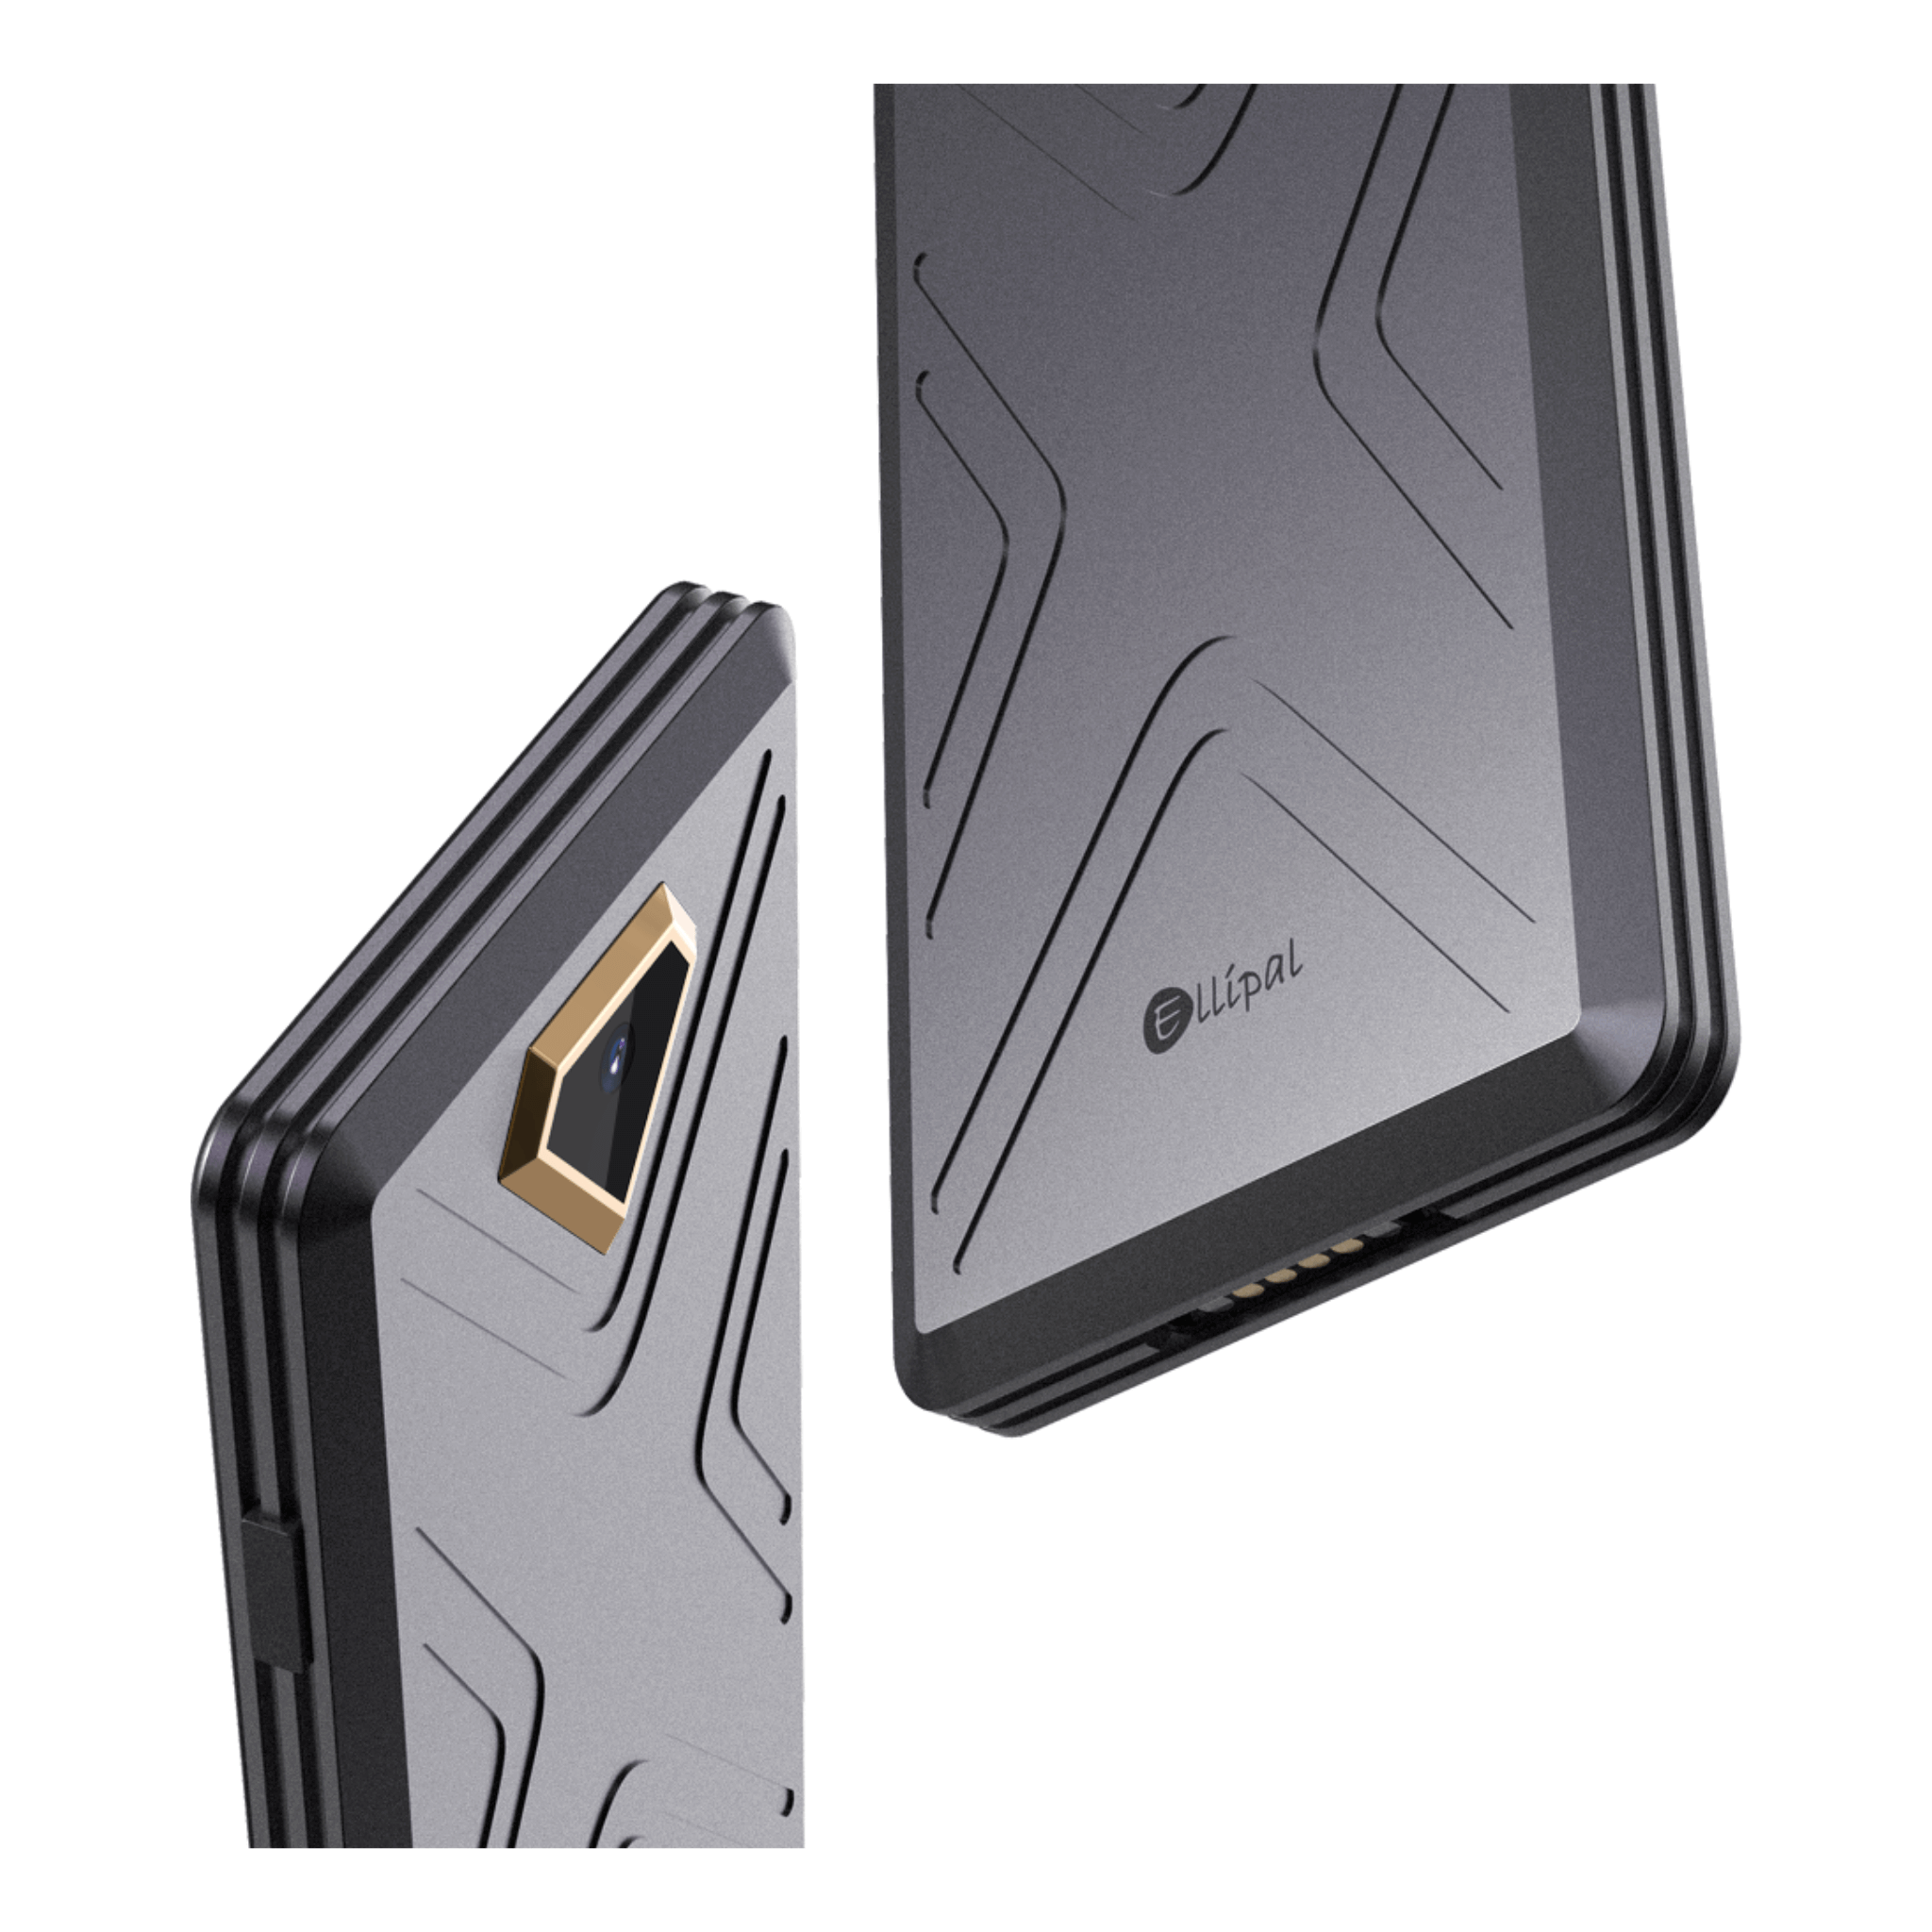 Ellipal Titan 2.0 Cryptocurrency Hardware Wallet Top and Bottom Angle